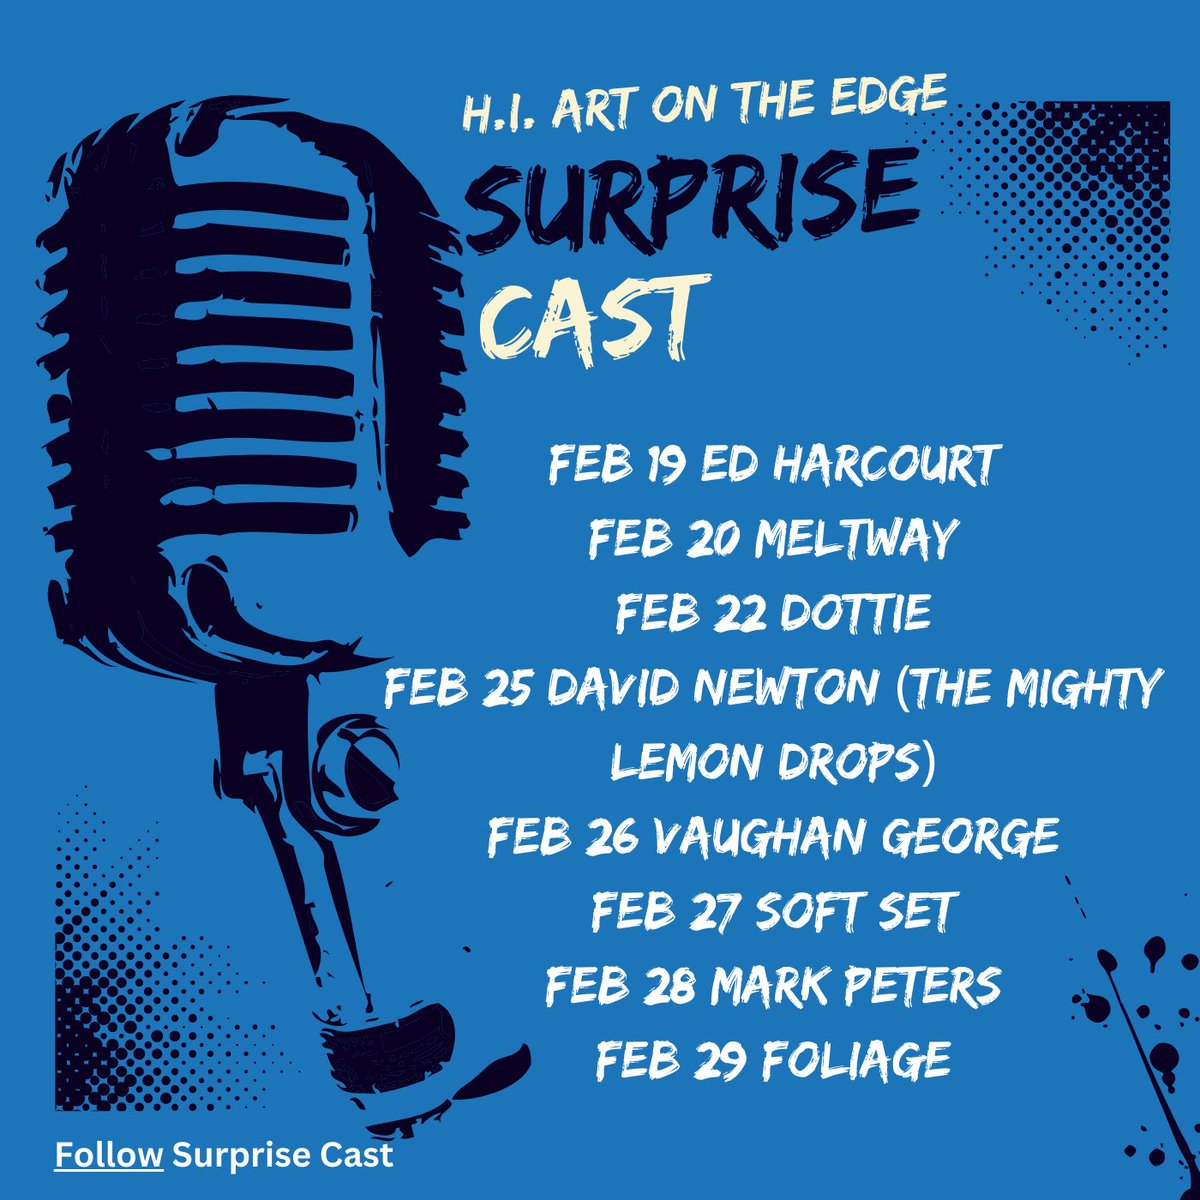 UPCOMING SURPRISE CAST! Check out the menu of enormous creativity. I'm looking forward to doing these podcast interviews! @edharcourt @meltwayofficial @thenameisdottie @theemightyangel @vaughn_george_v @softsetmusic @markpetersmusic @foliage_man #podcast hiartontheedge.podbean.com